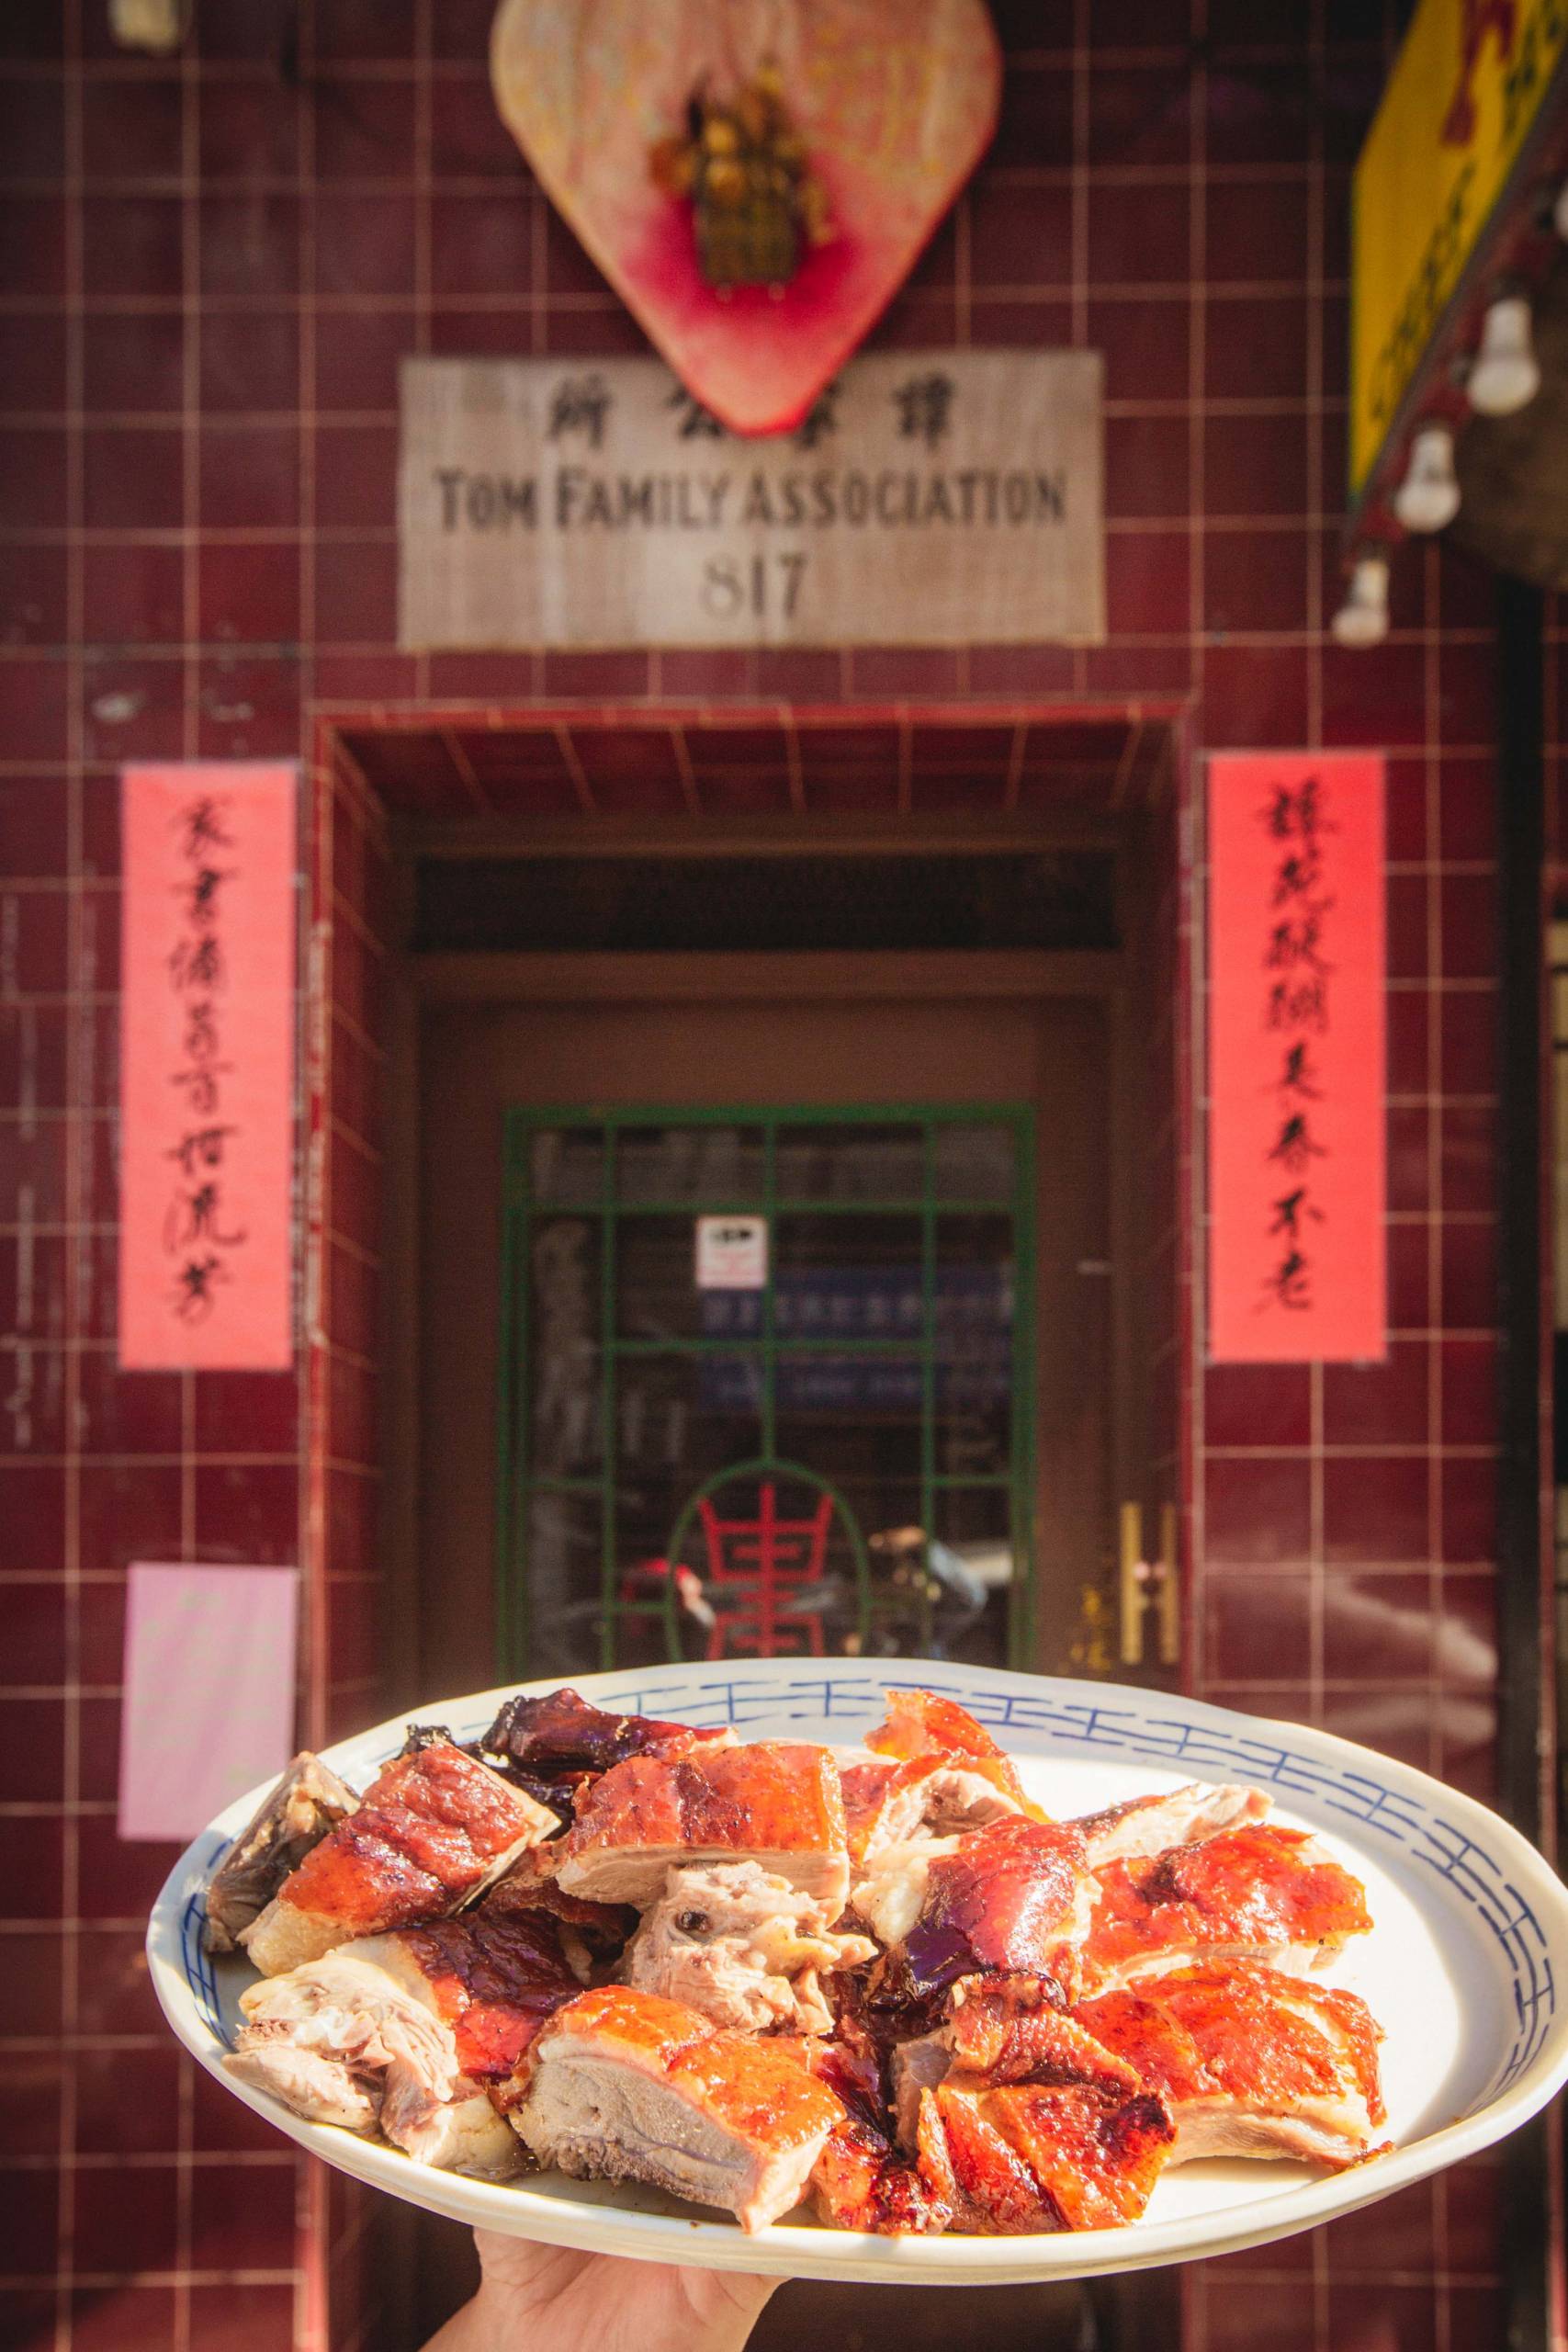 A plate of roast duck held in front of a family association building on Clay Street in San Francisco Chinatown.